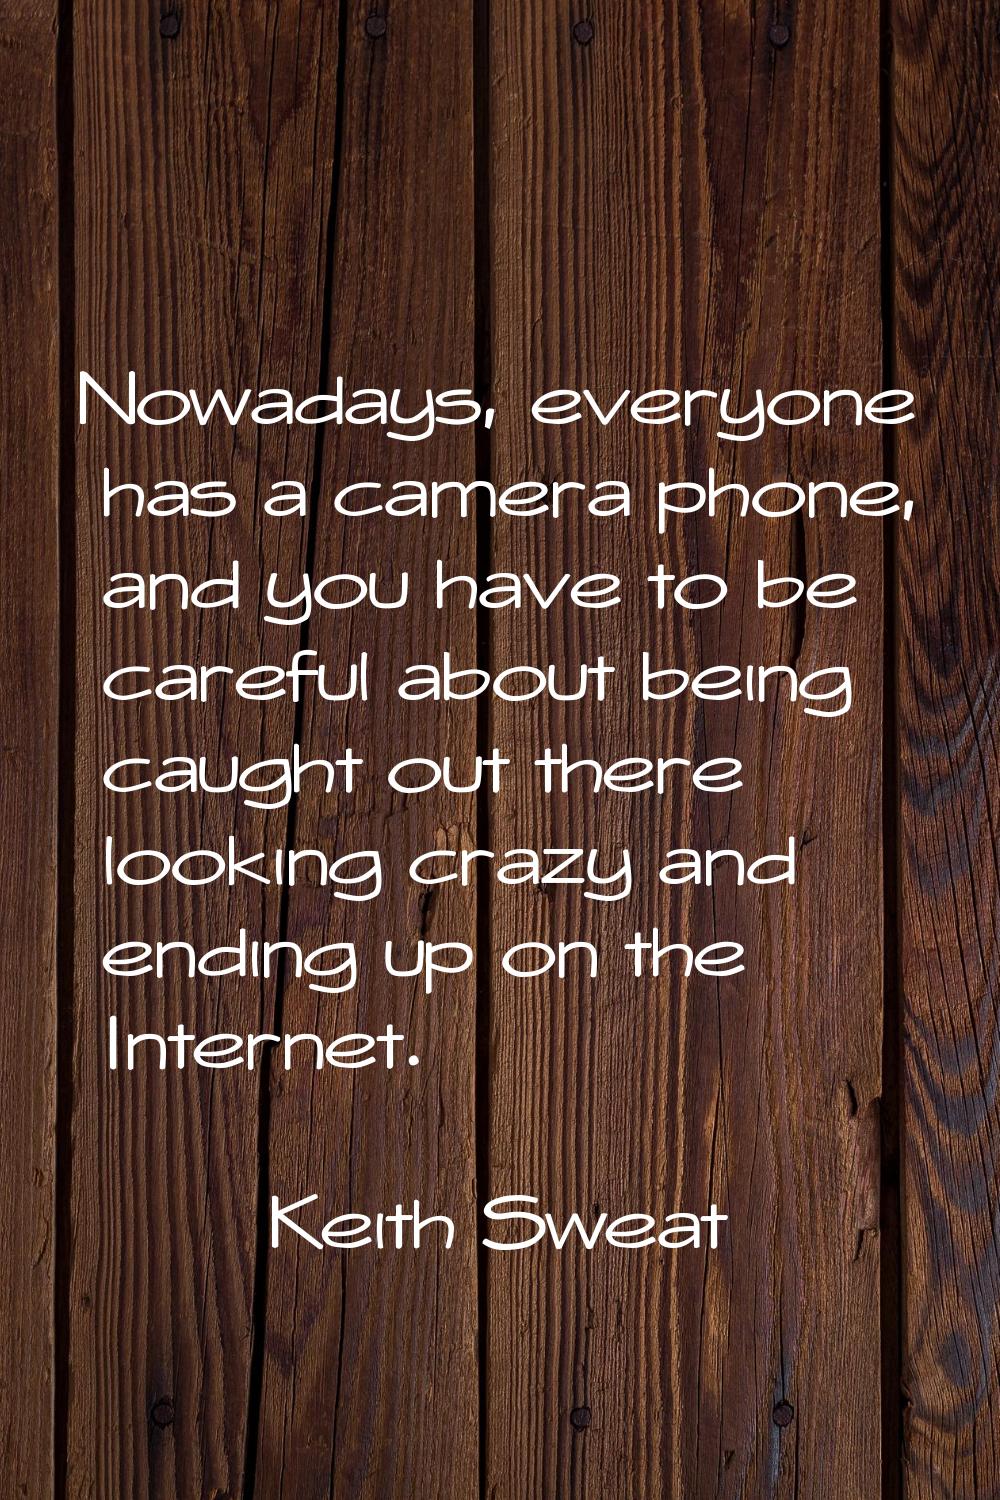 Nowadays, everyone has a camera phone, and you have to be careful about being caught out there look